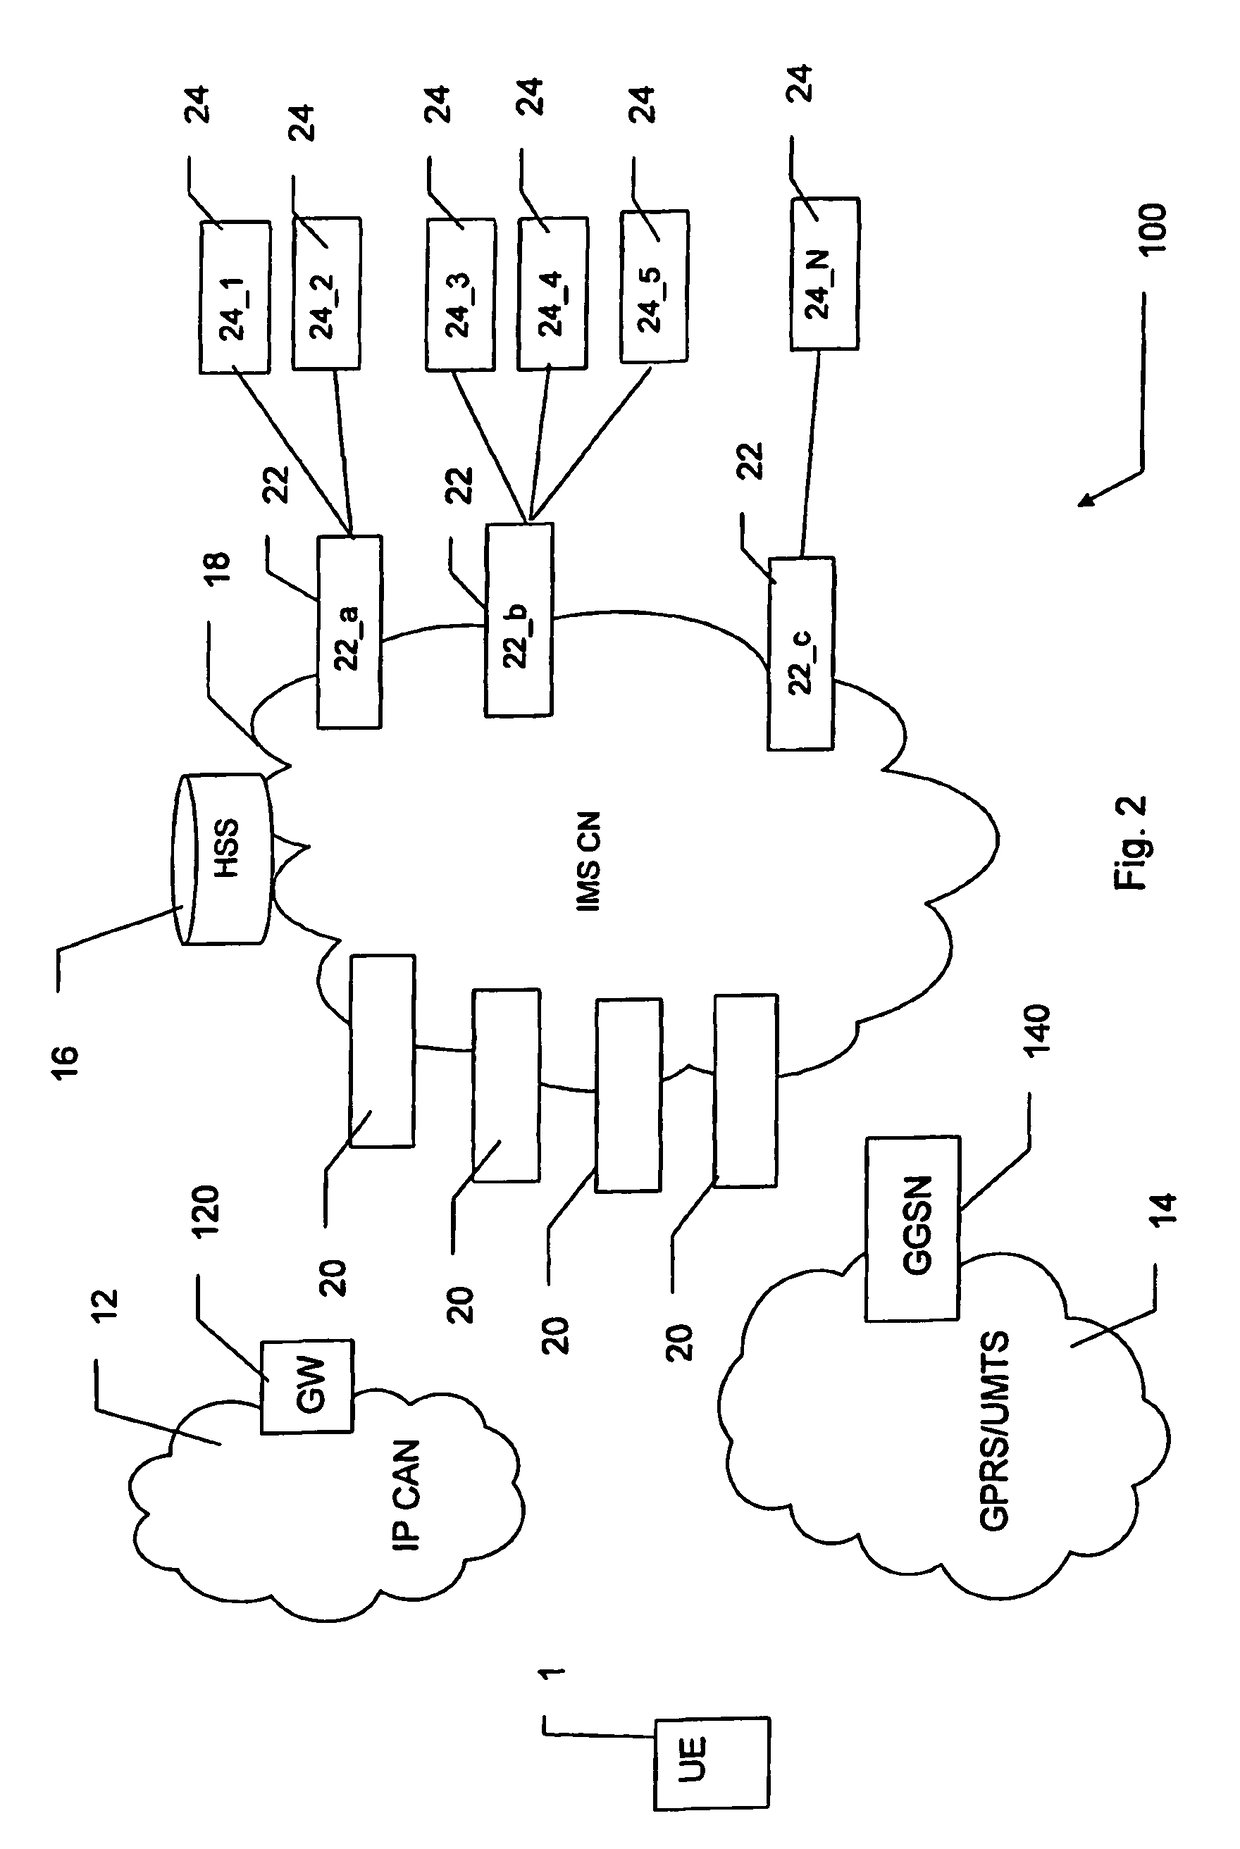 Method and apparatuses for the provision of network services offered through a set of servers in an IMS network